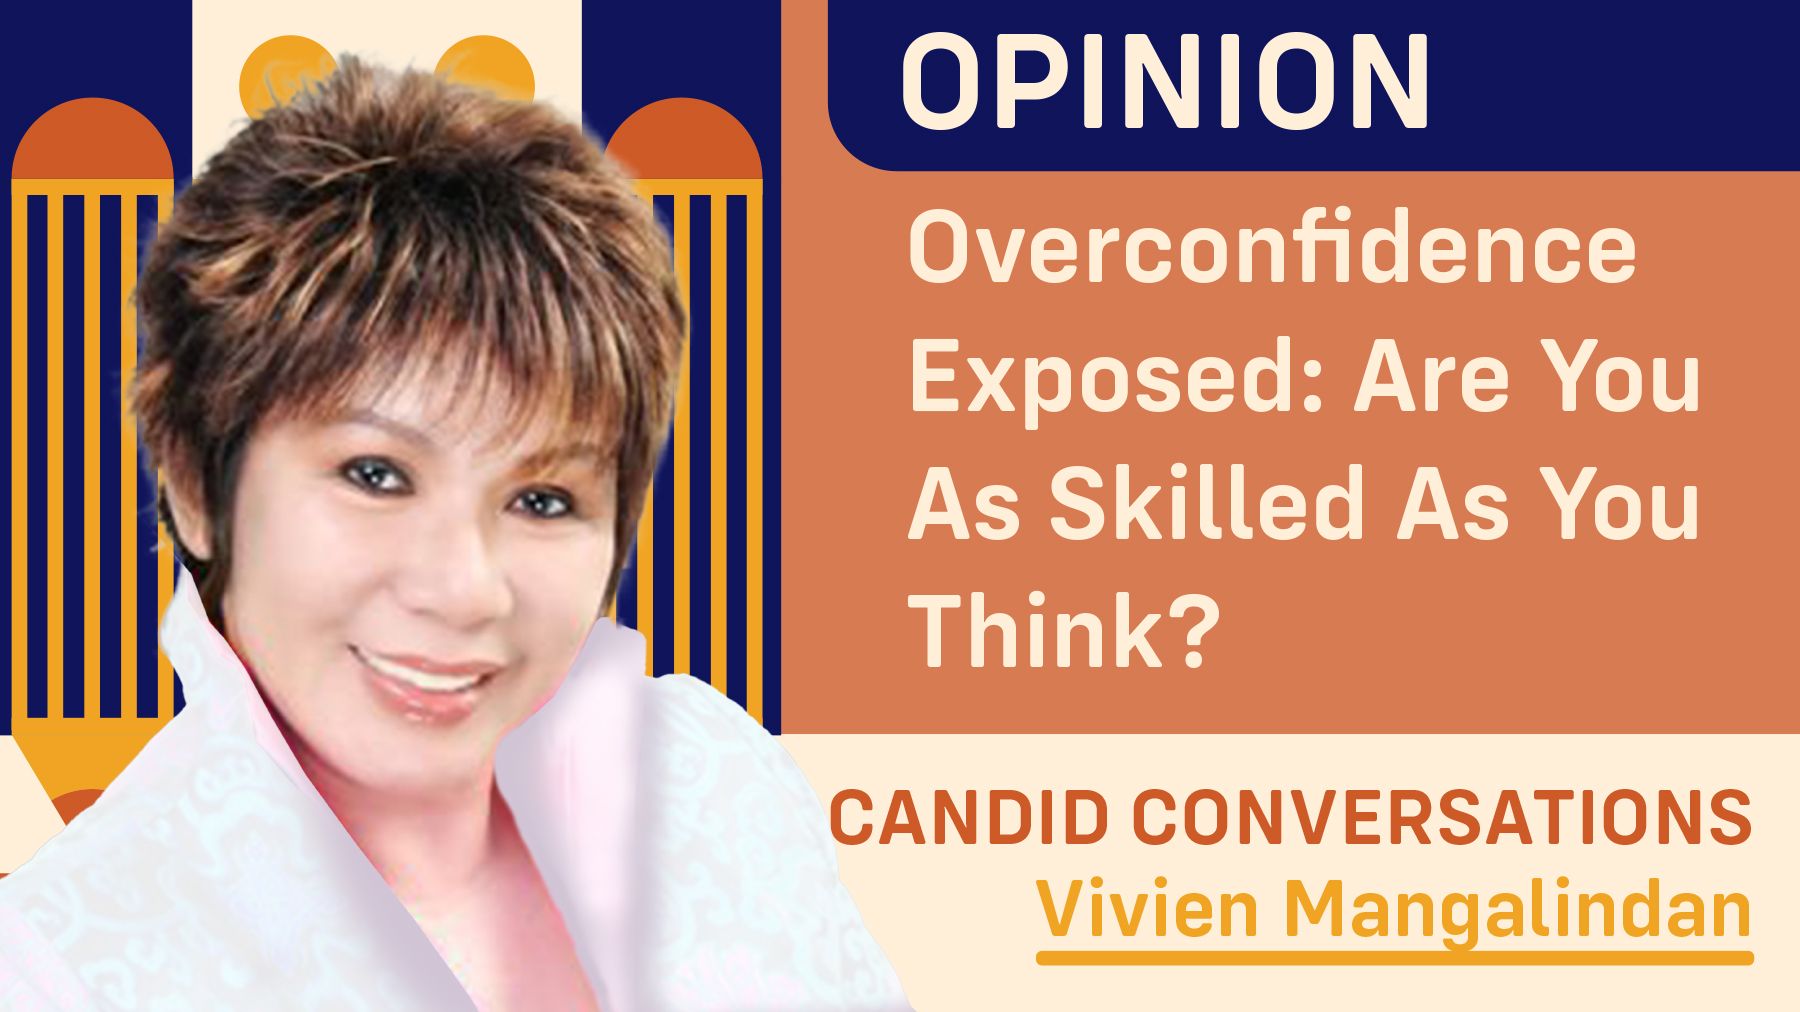 Overconfidence Exposed: Are You As Skilled As You Think?